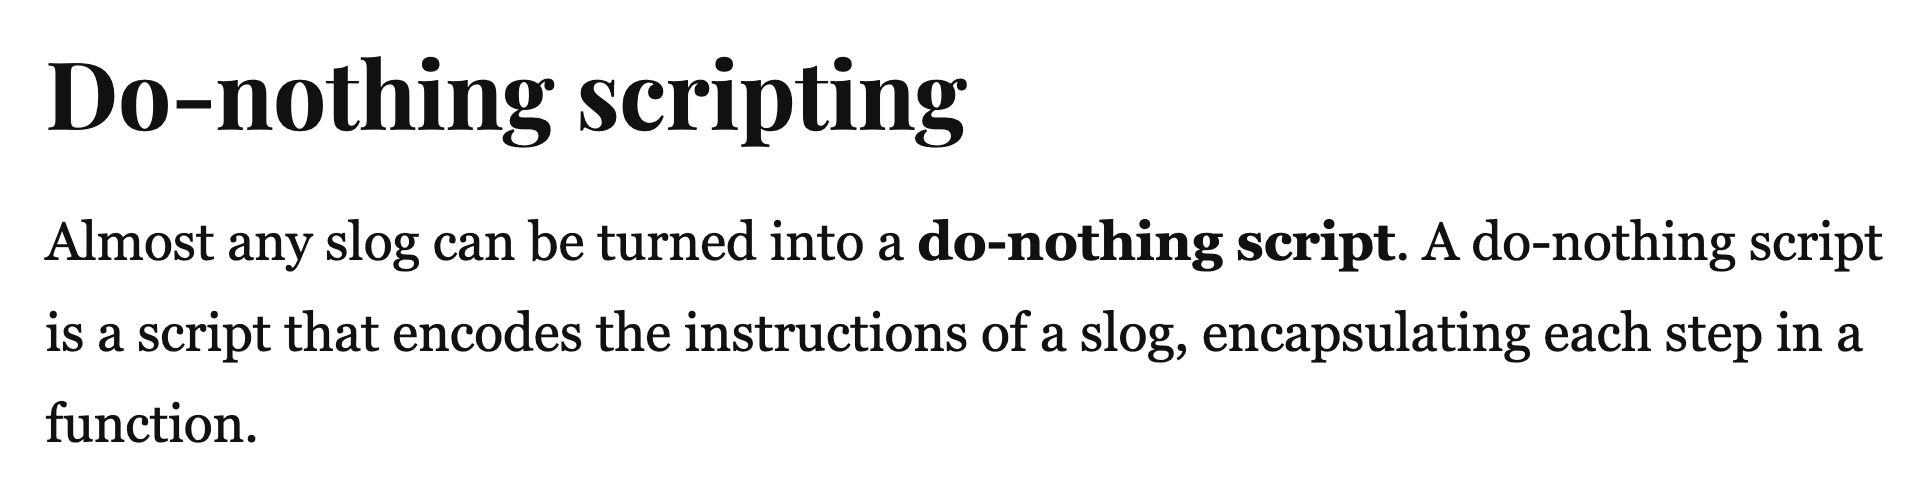 Do-nothing scripting – Almost any slog can be turned into a do-nothing script. A do-nothing script is a script that encodes the instructions of a slog, encapsulating each step in a function. 